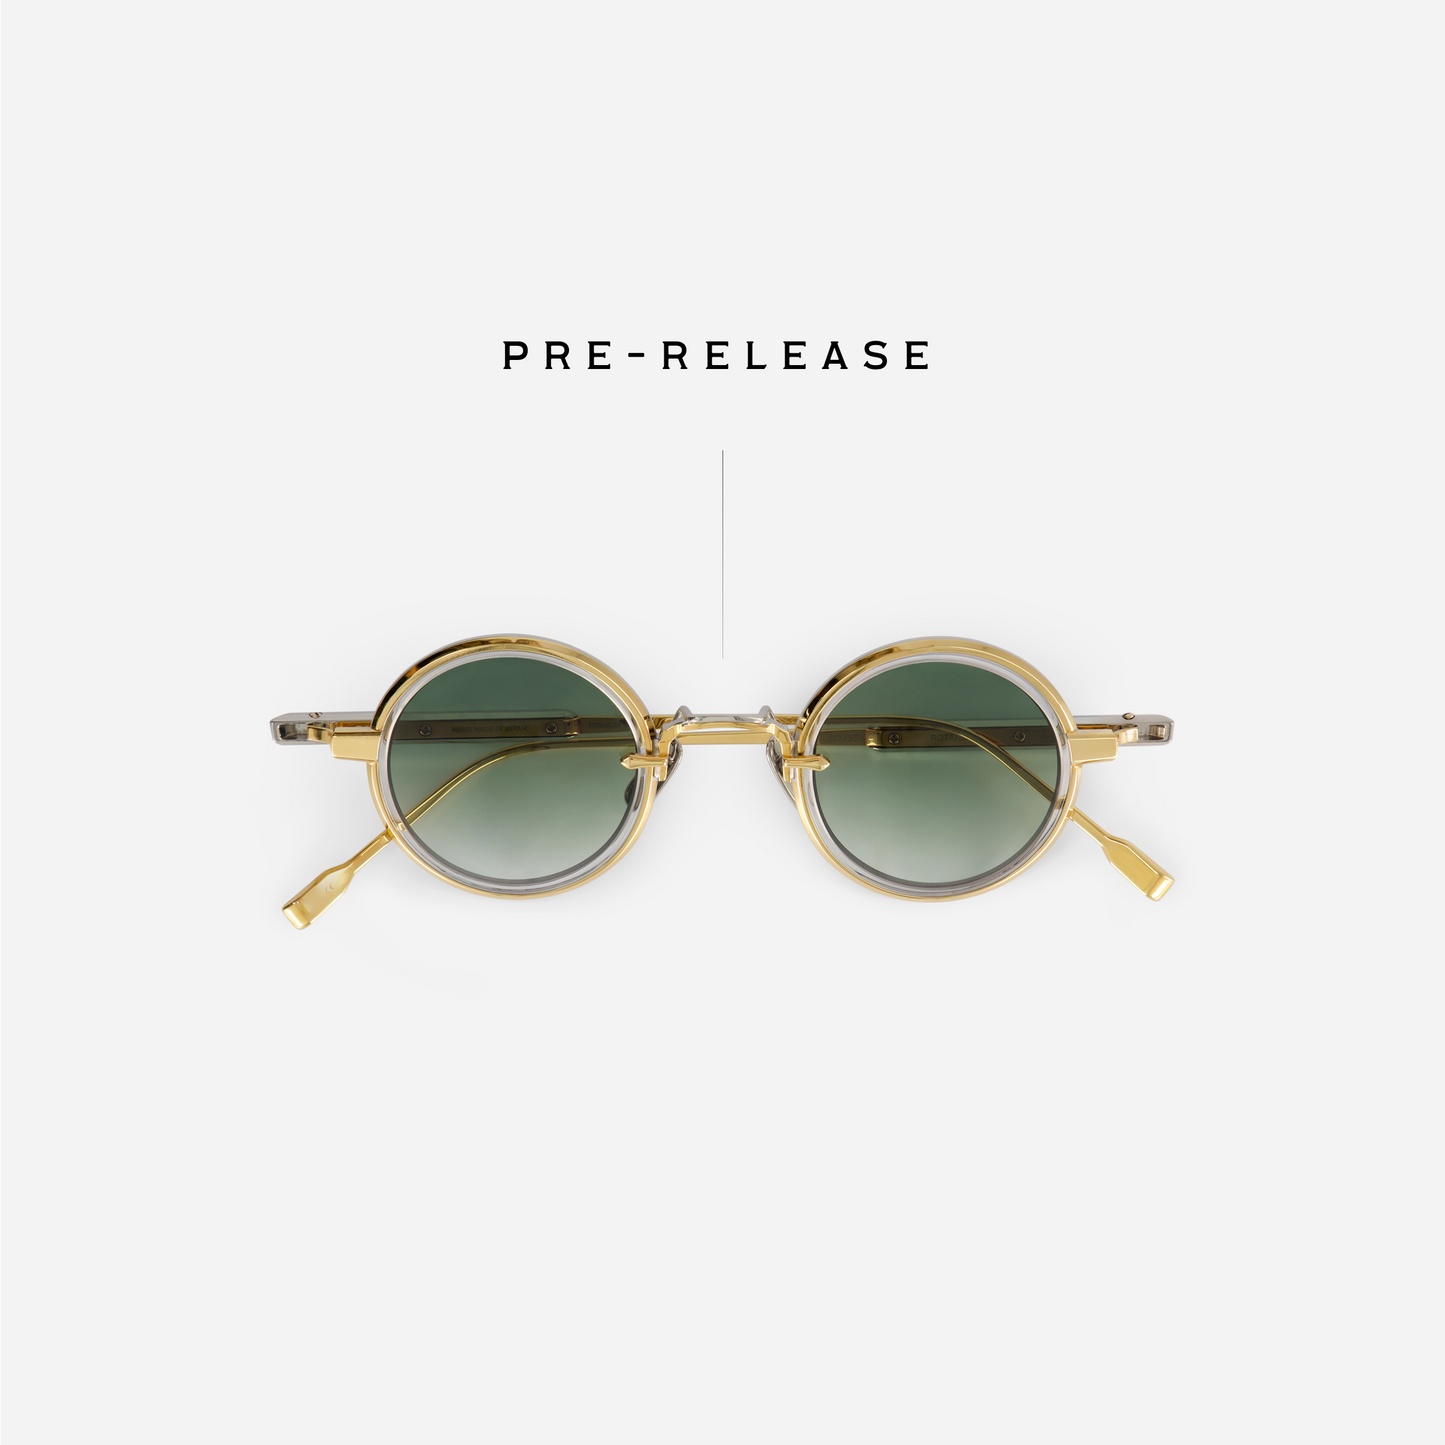 The Rotanev-T YG/P-1 features a titanium frame with yellow gold and platinum coatings, a crystal takiron rim insert, and gradient green lenses.